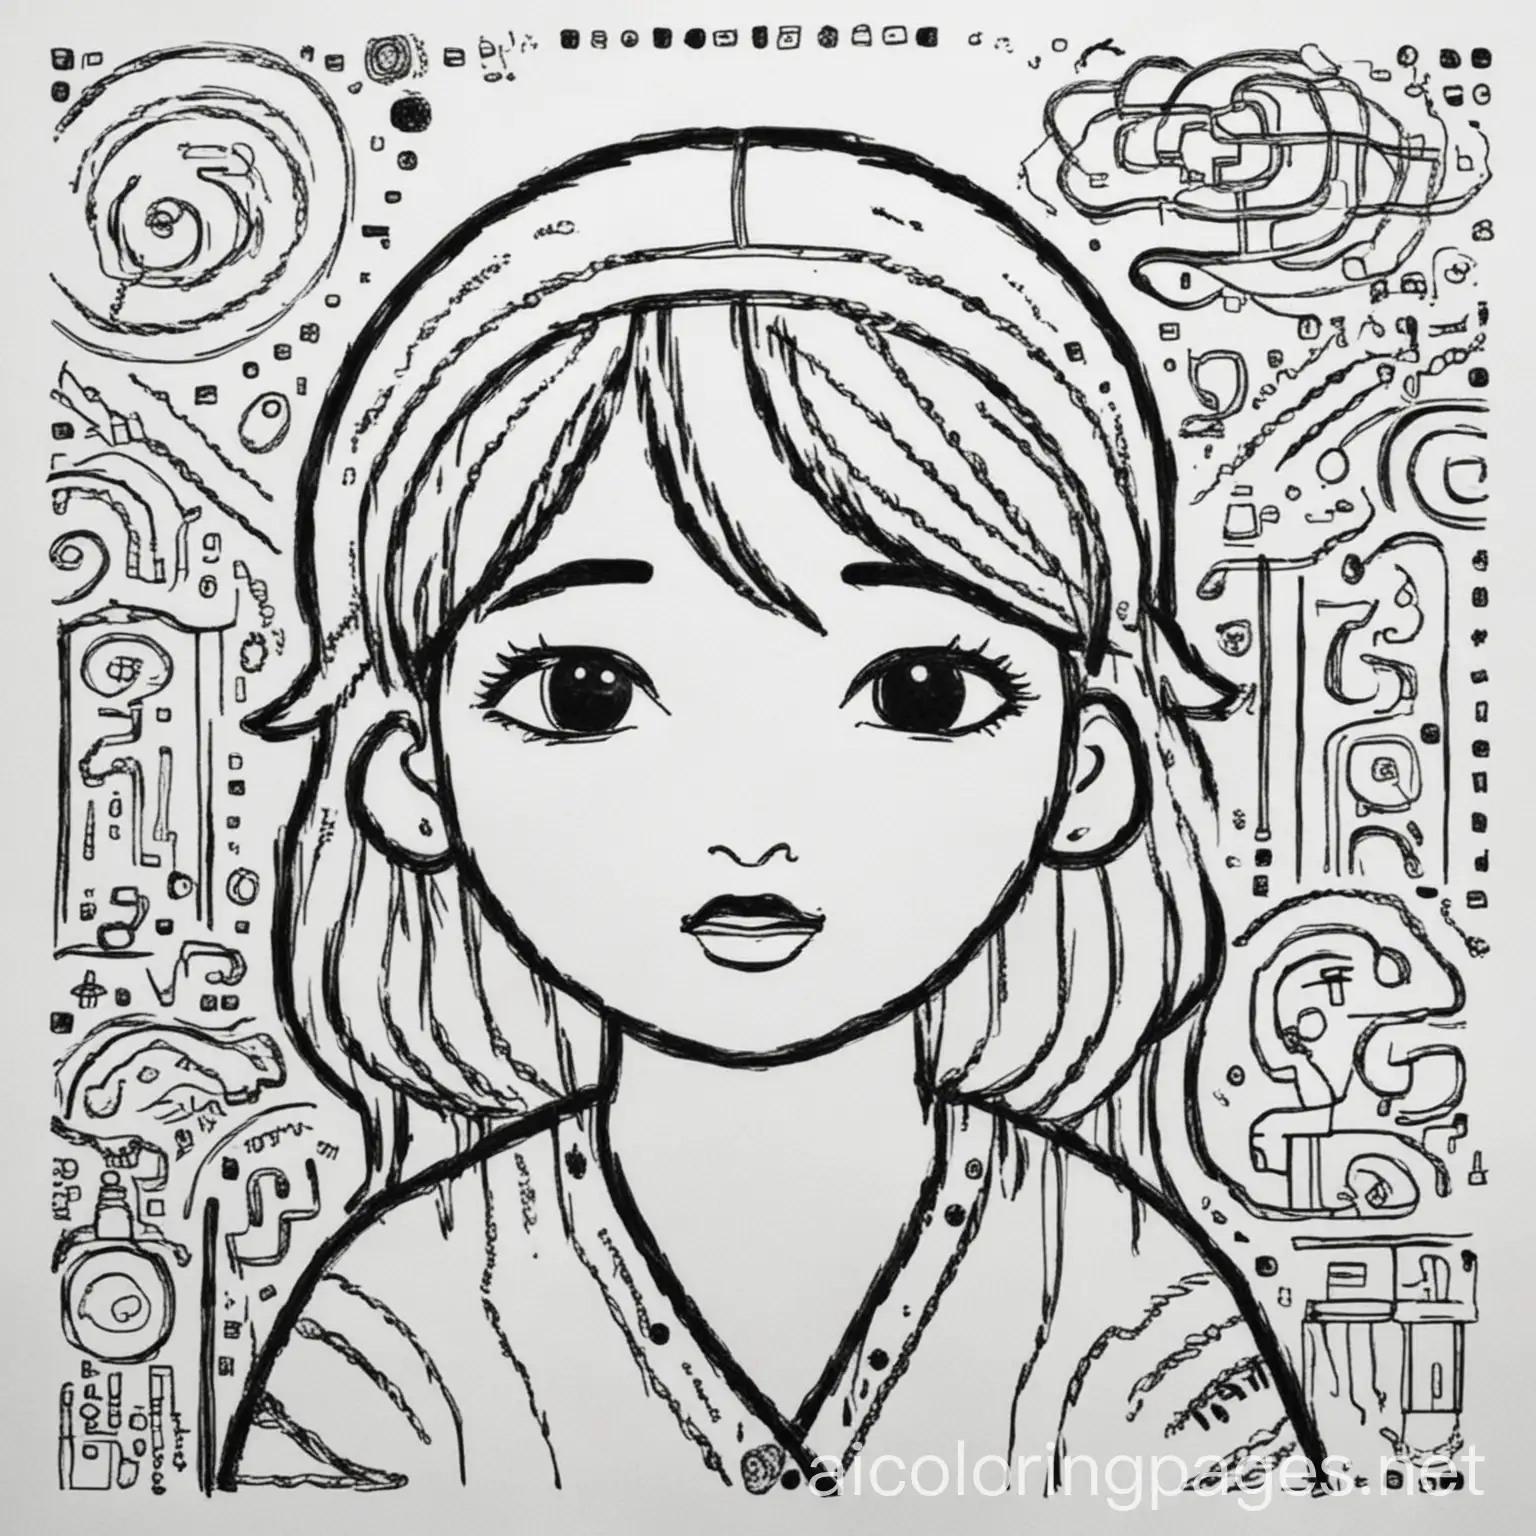 Simple-Black-and-White-Coloring-Page-Human-Culture-Illustration